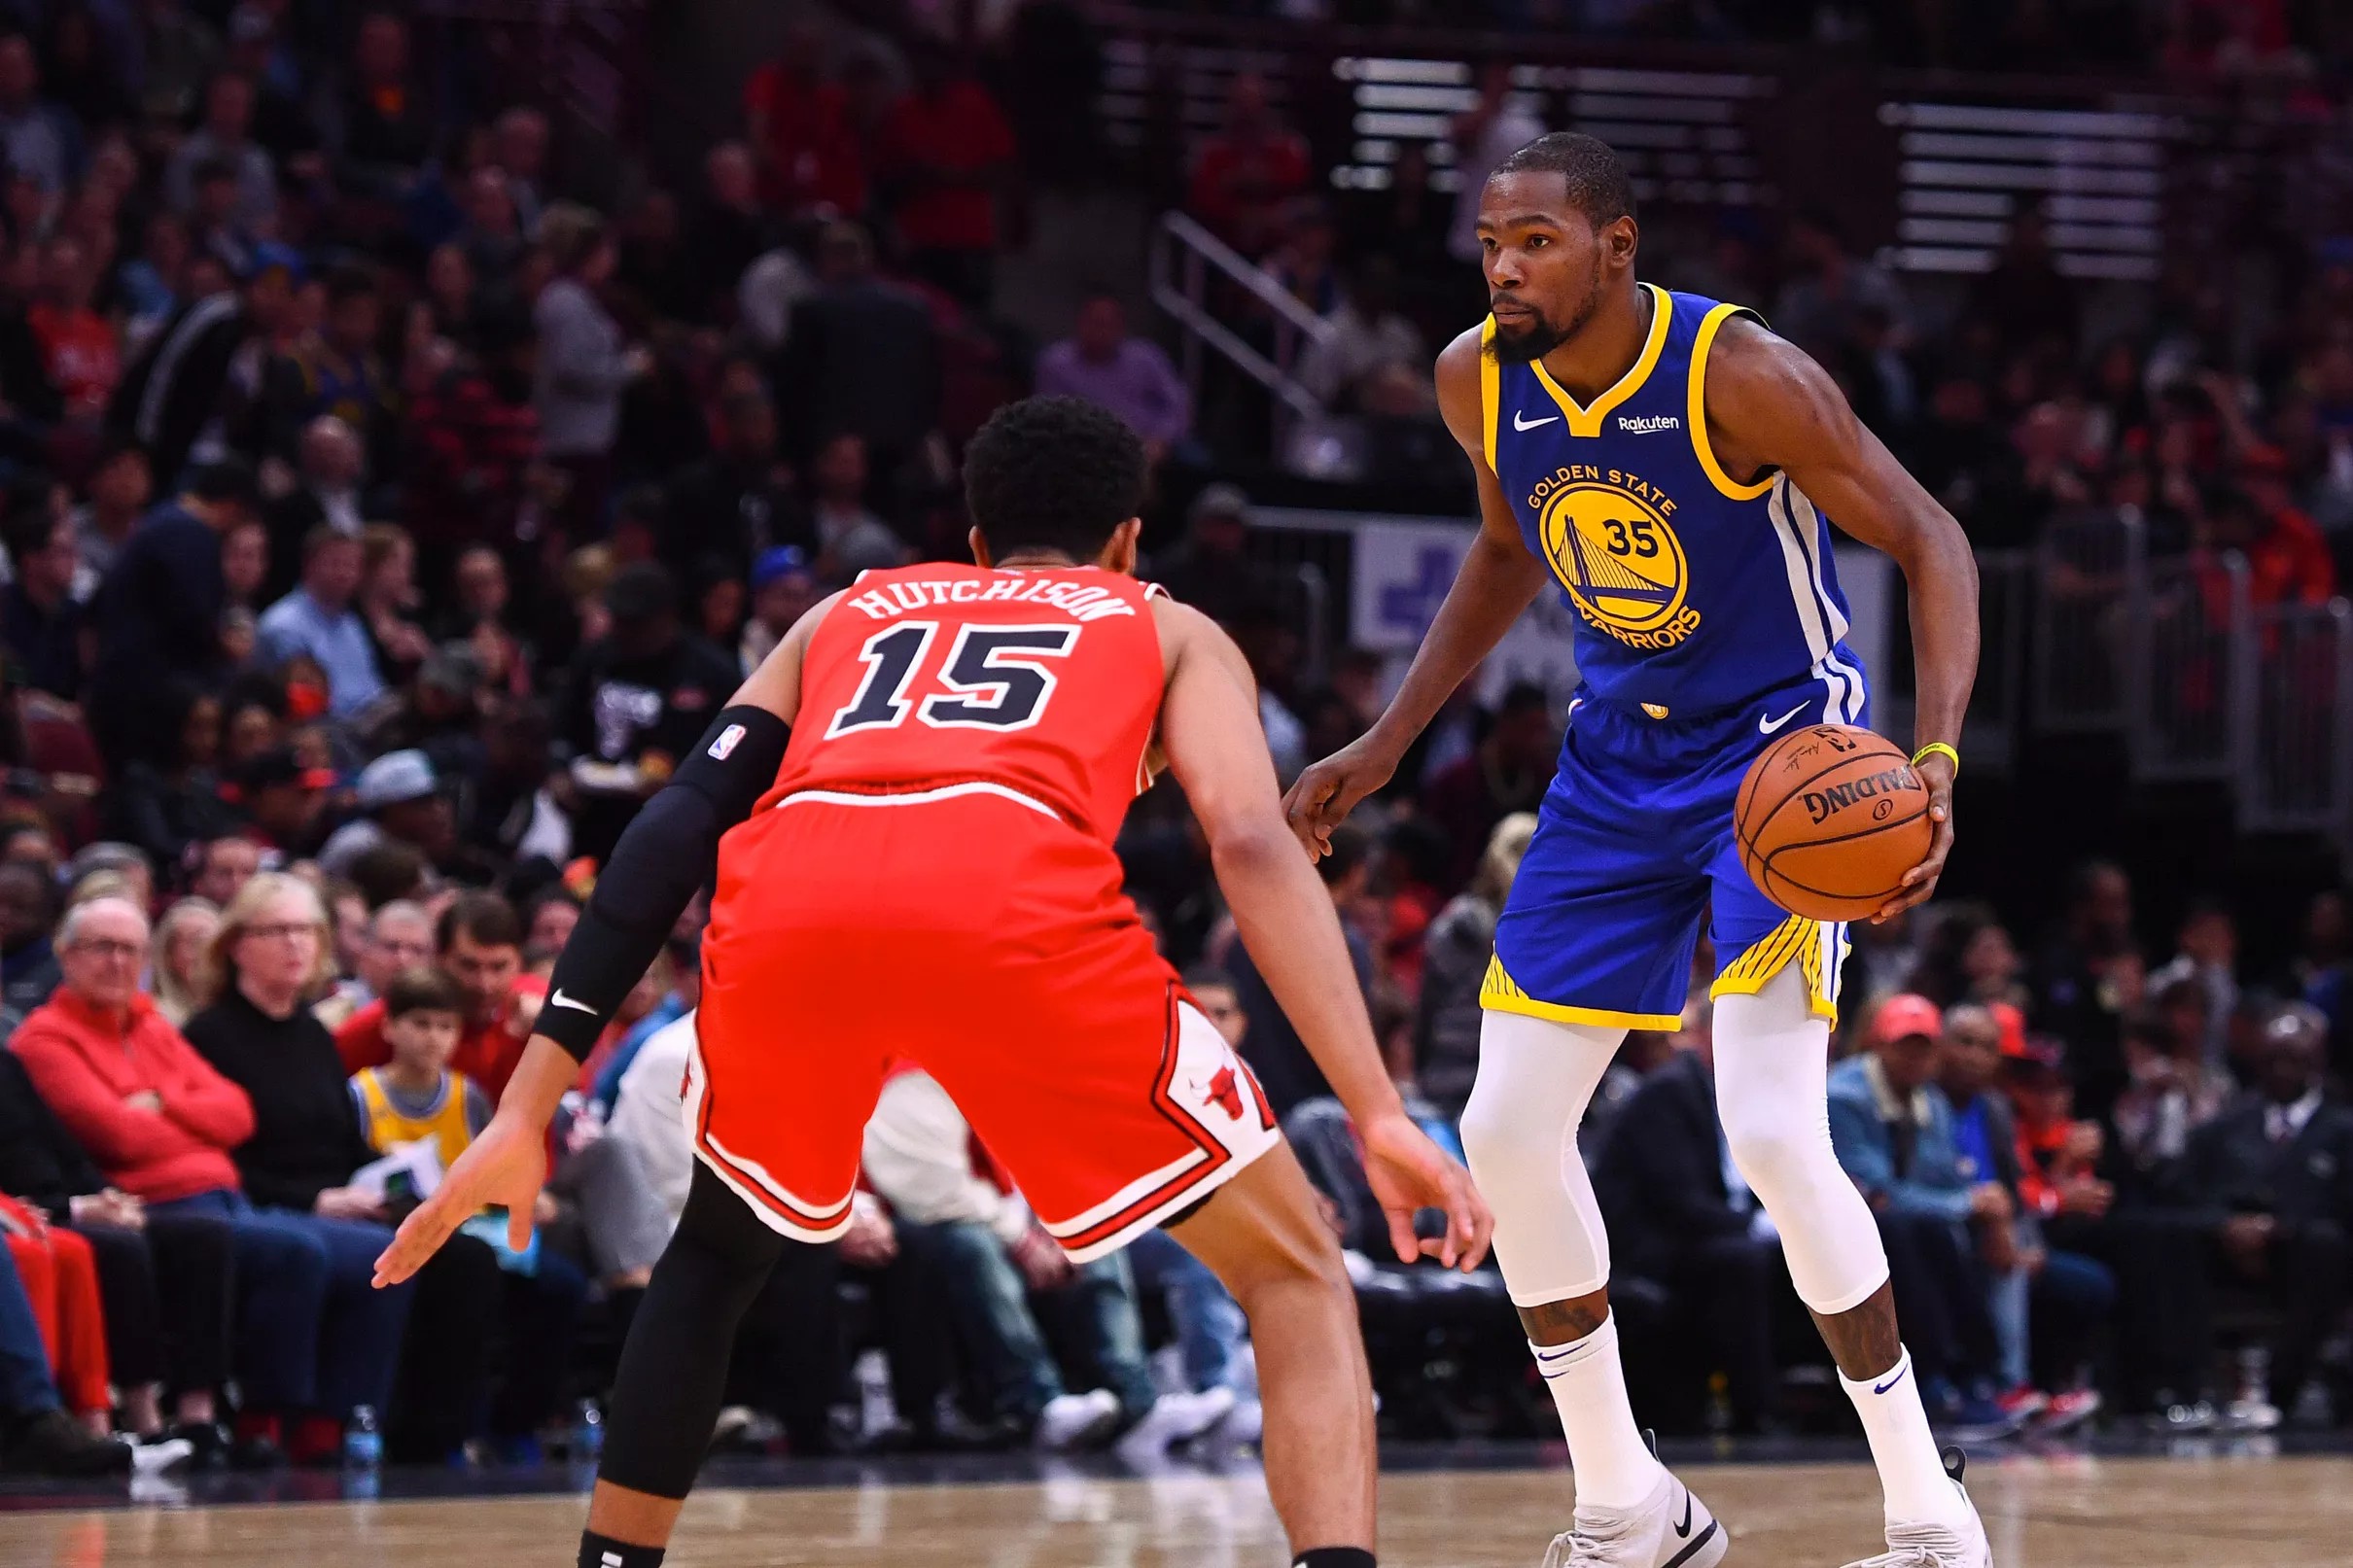 Bulls vs. Golden State Warriors preview and open thread